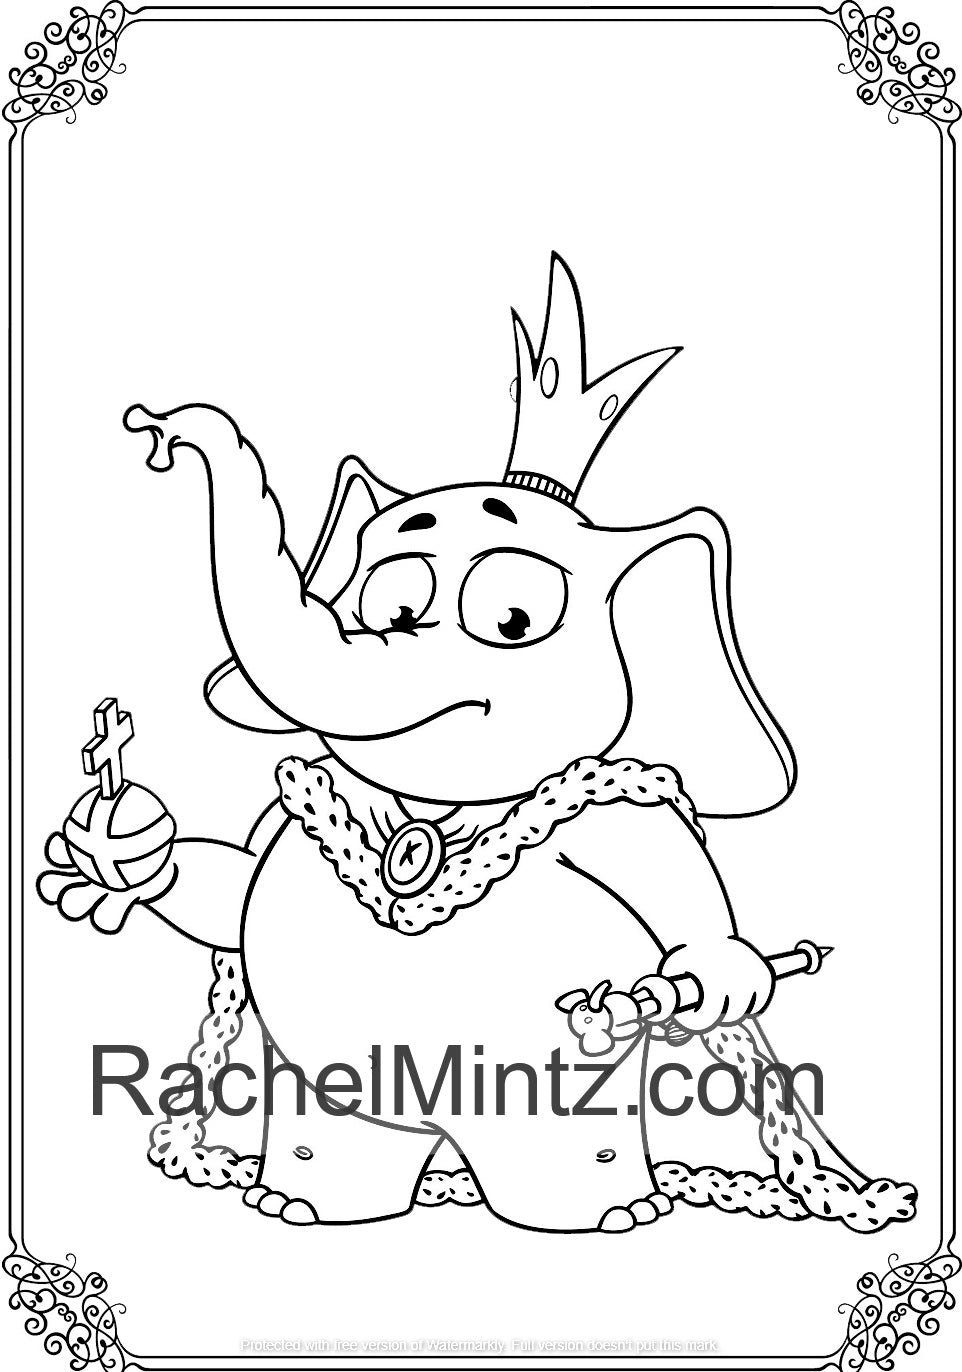 The Cute Elephant - Large Print Coloring Book, Clear Easy Designs, Bold lInes - Printable Format Book